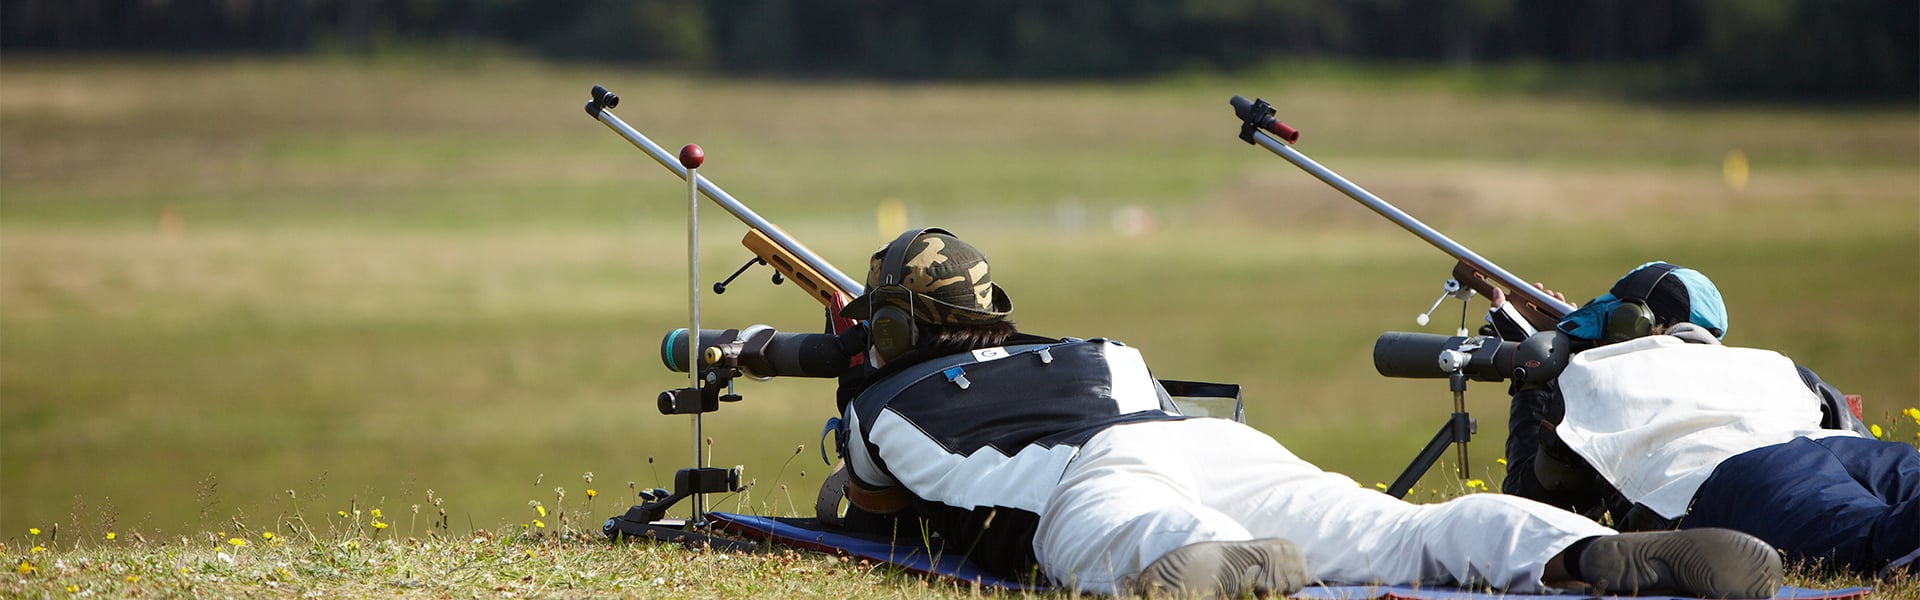 Two target shooters lying down aiming down the scopes of their rifles